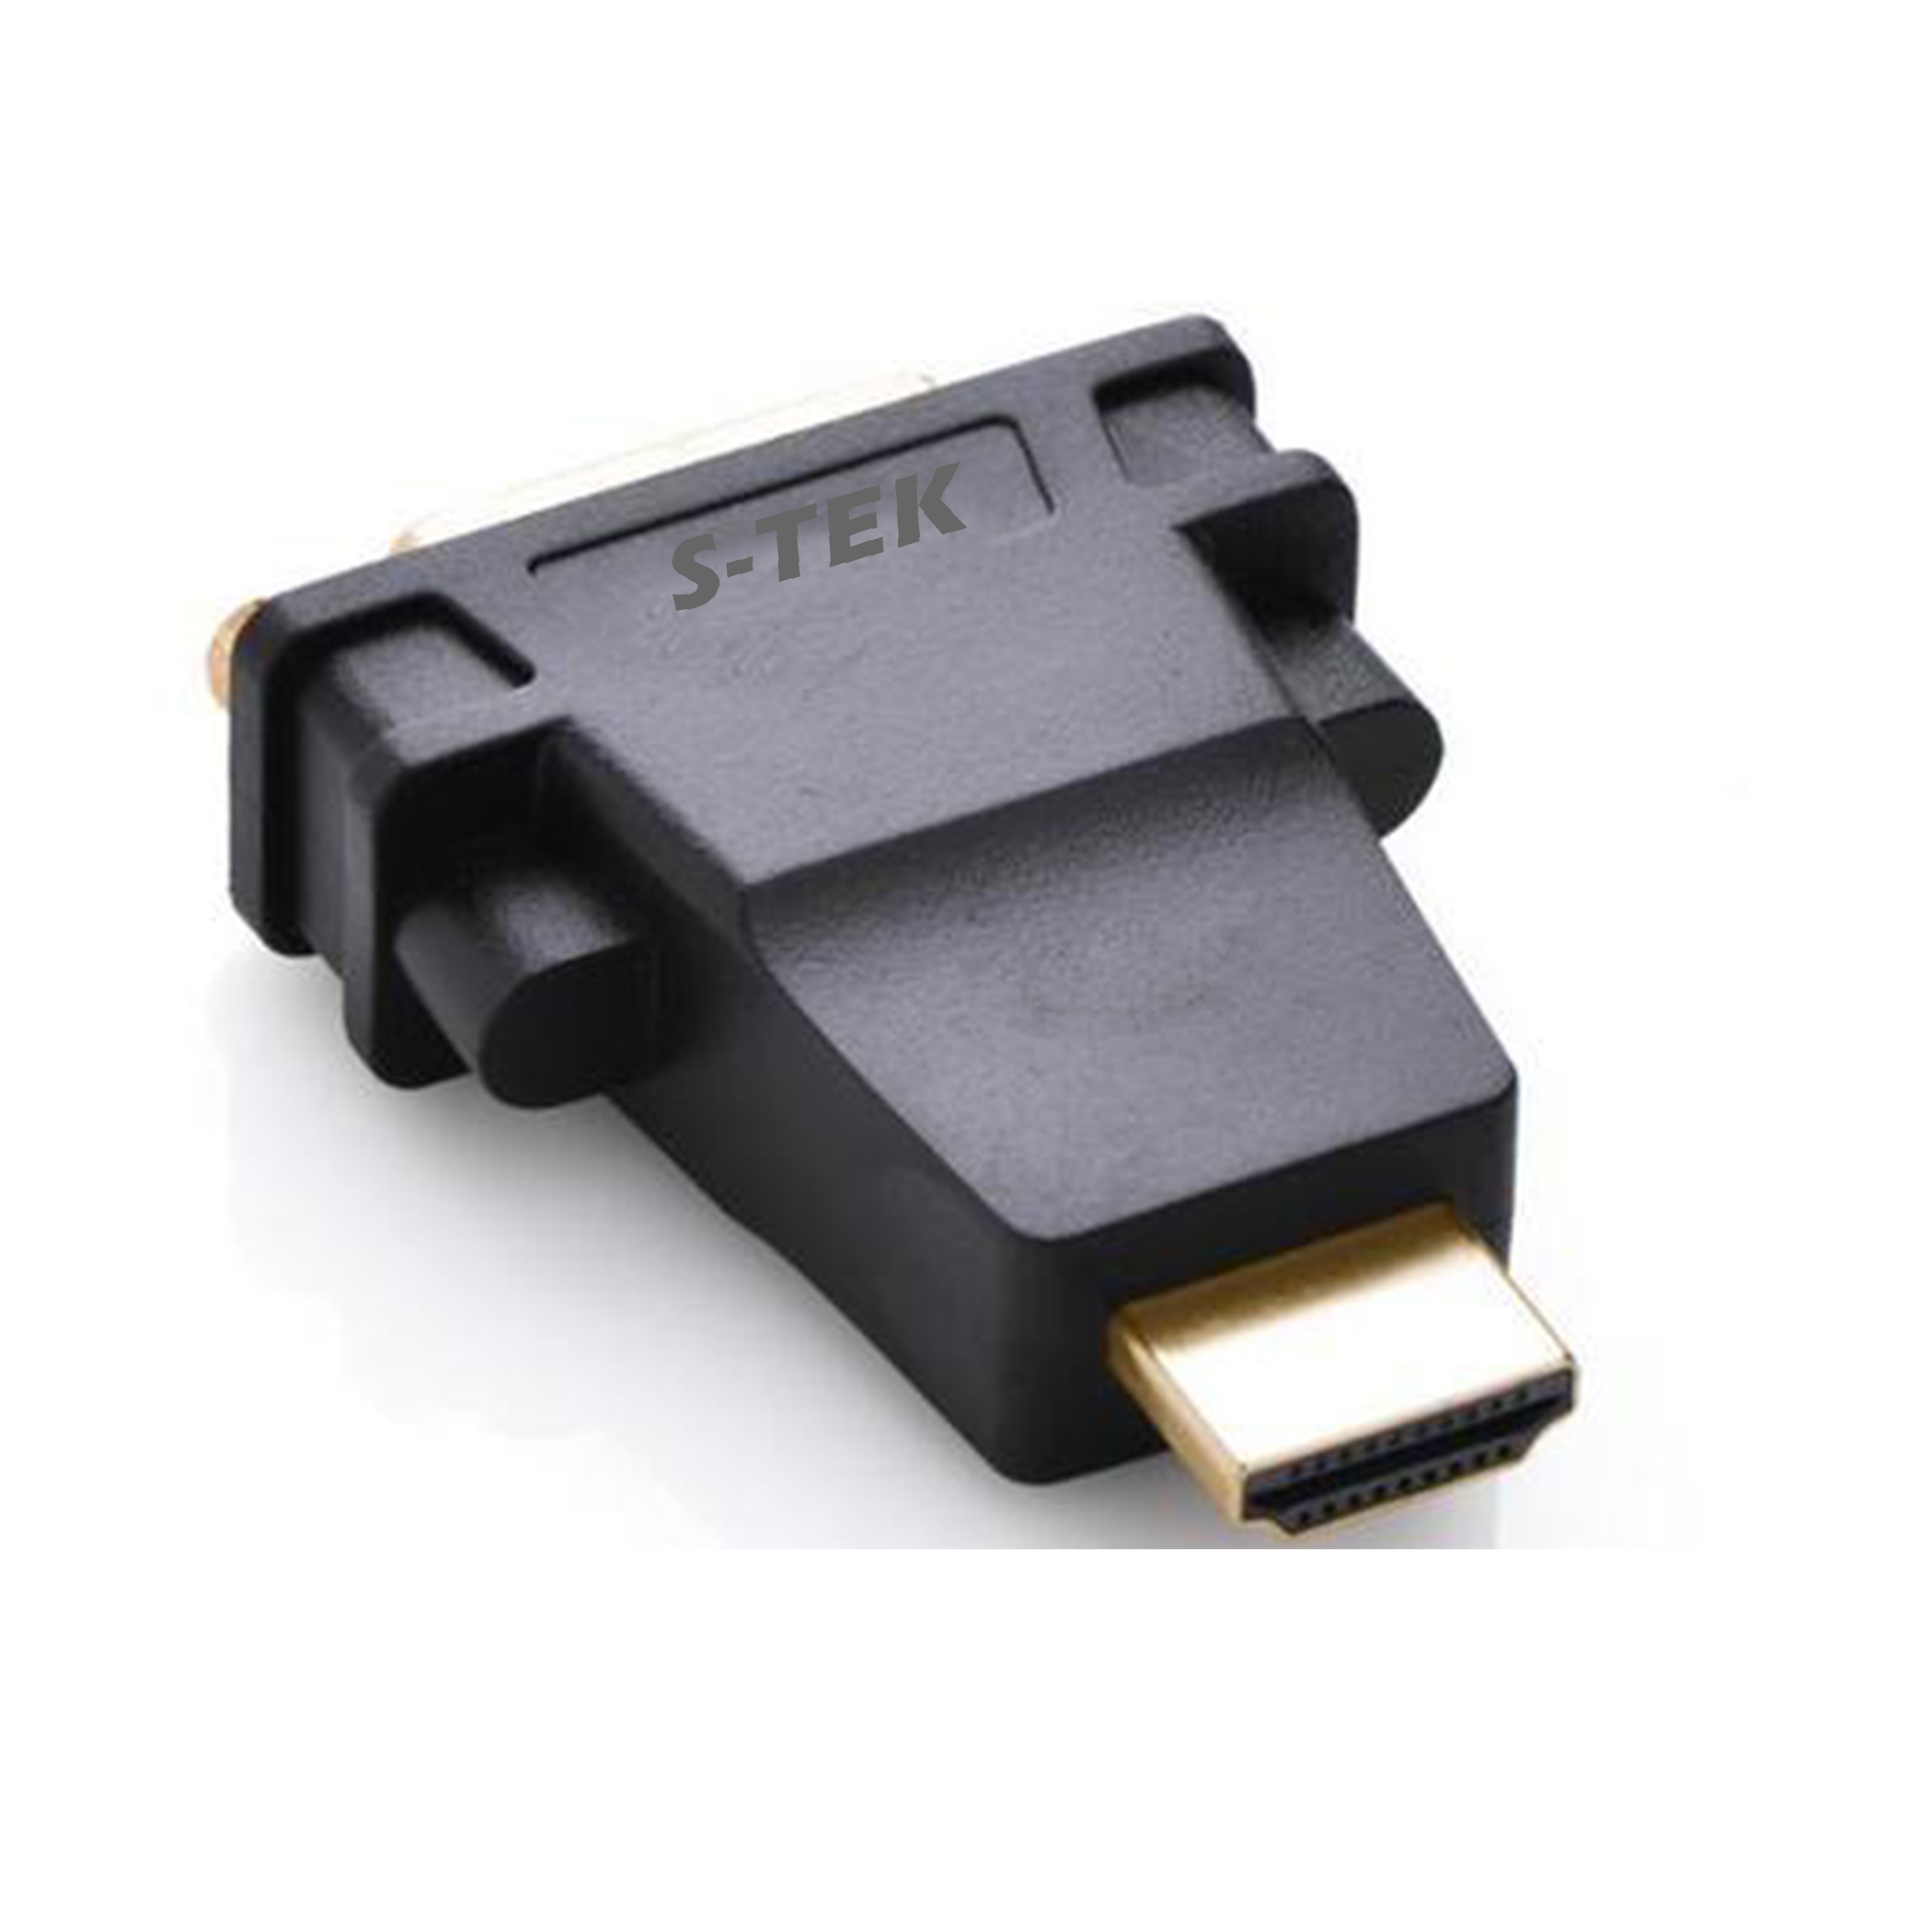 HDMI MALE TO DVI 24+1 FEMALE ADAPTER -STEK  HIGH QUALITY CONNECTORS